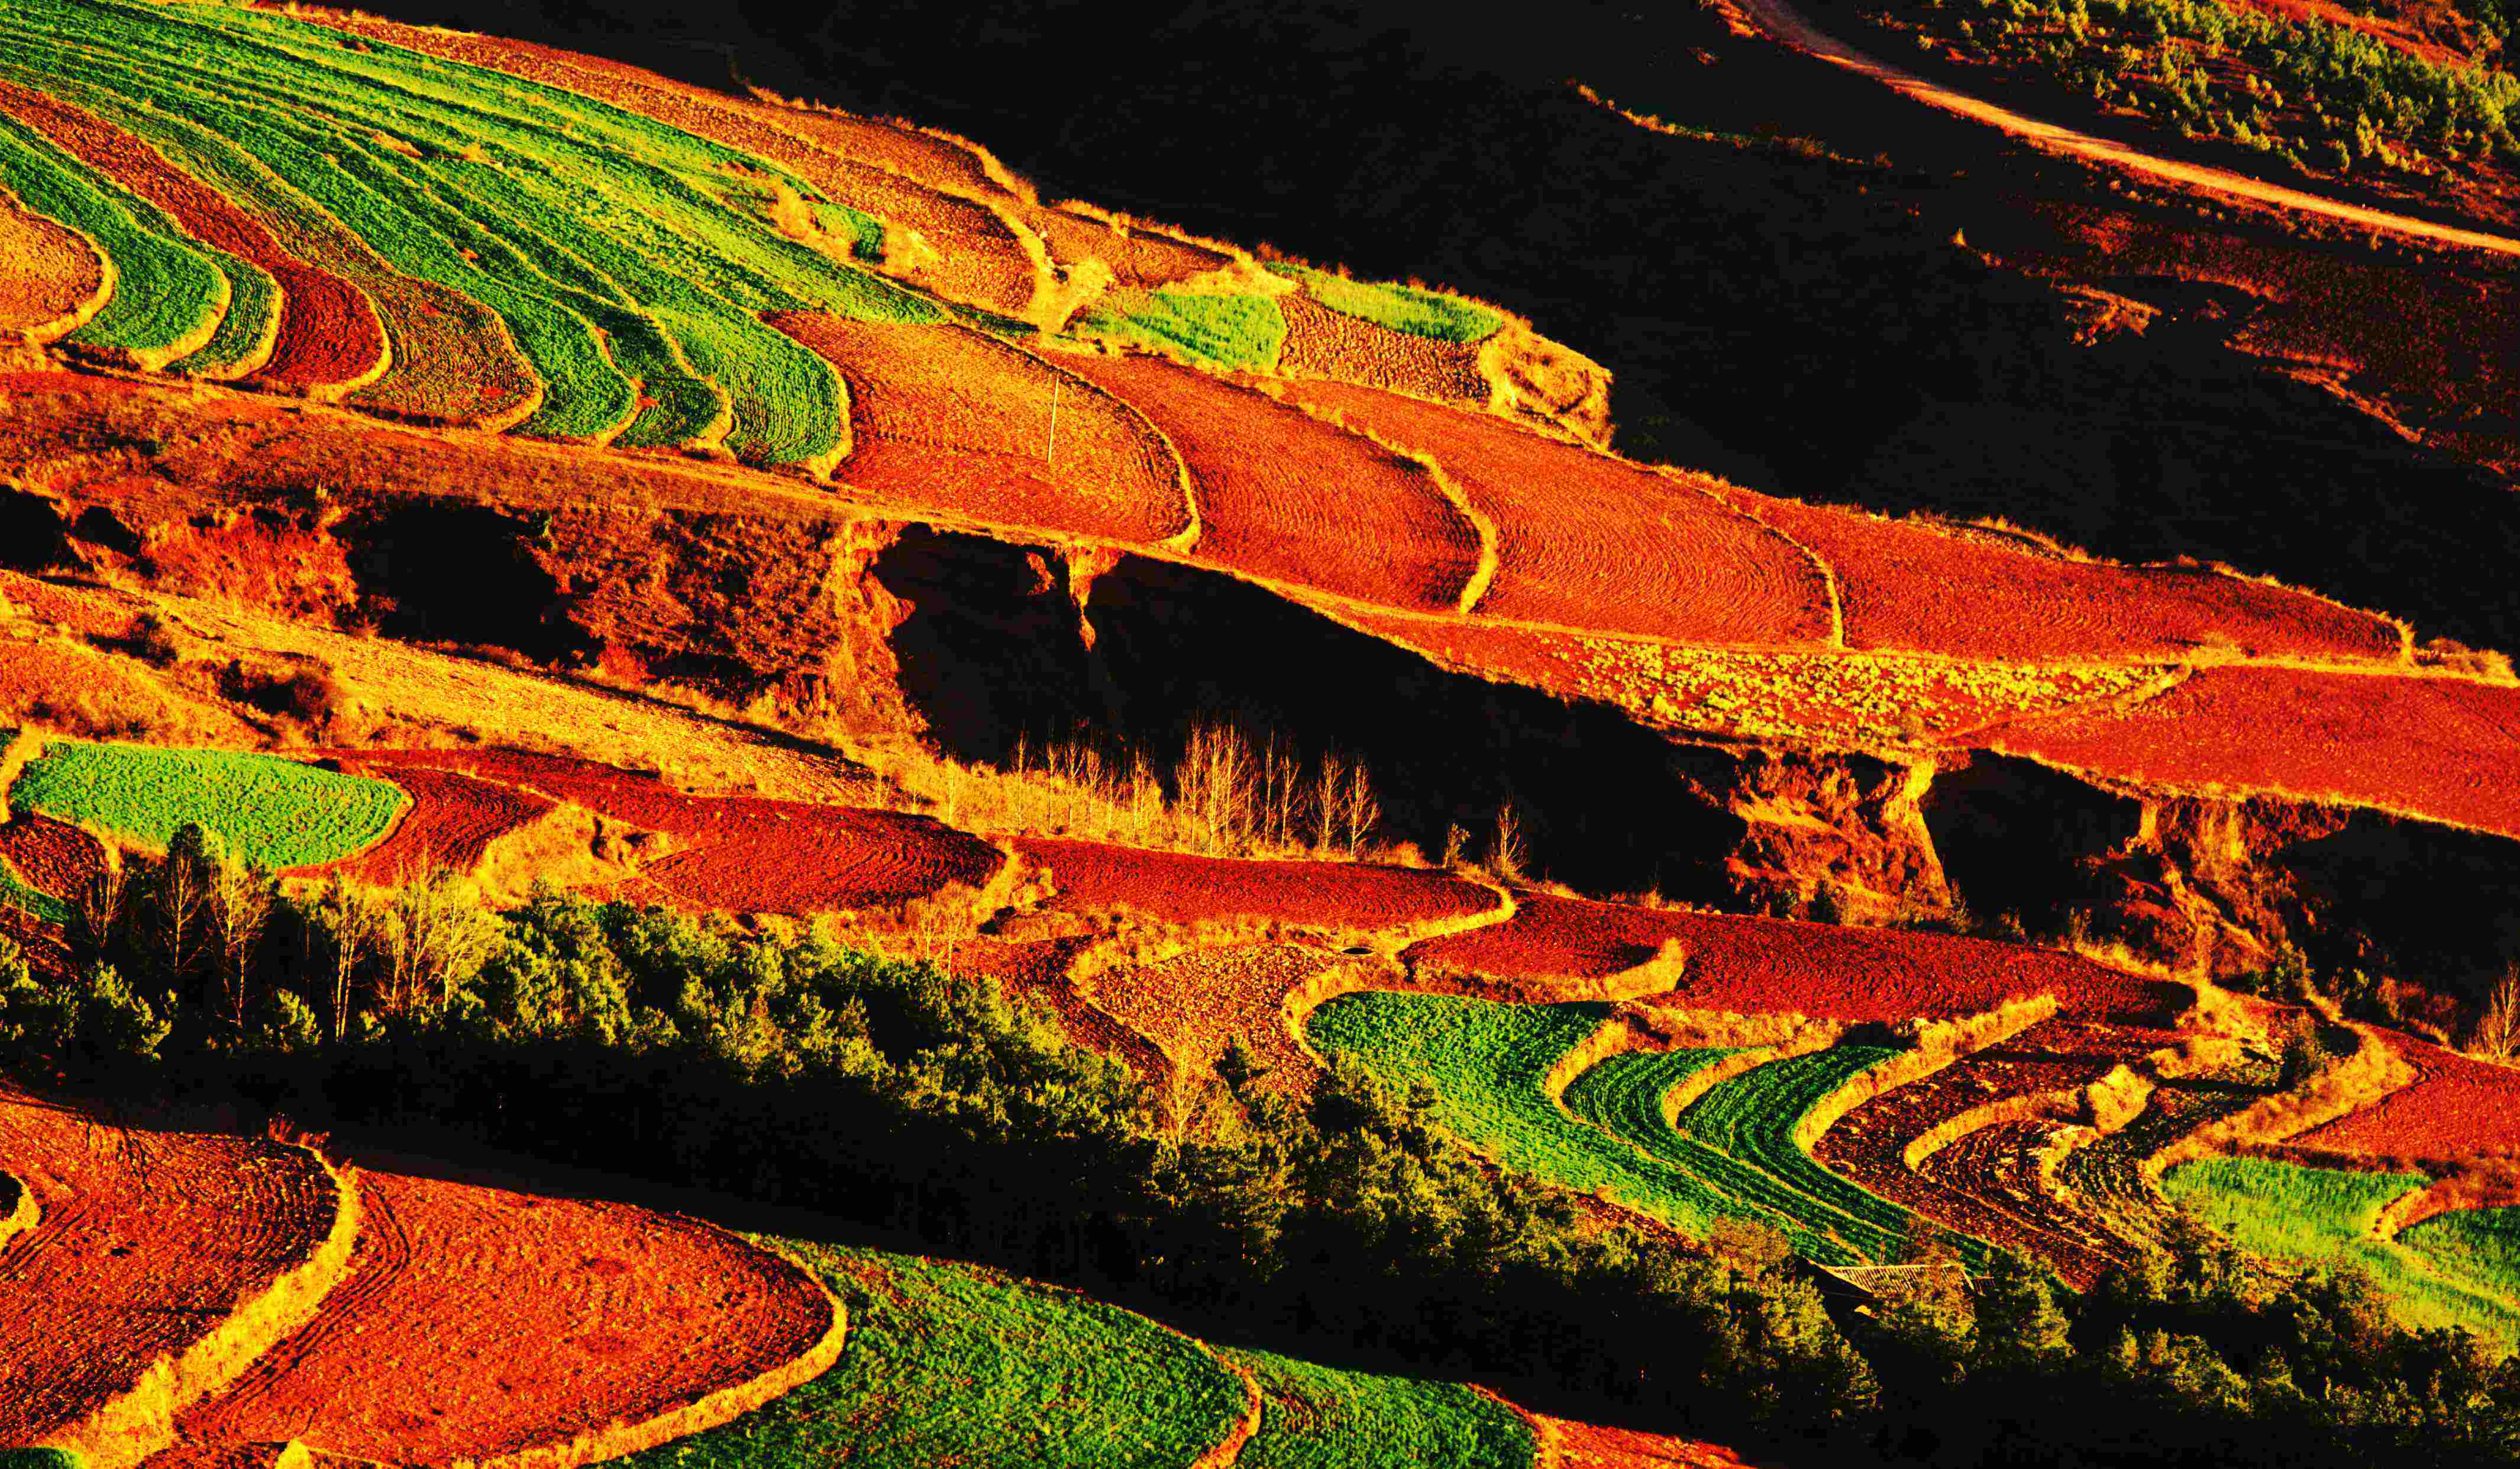 The Dongchuan Red Land